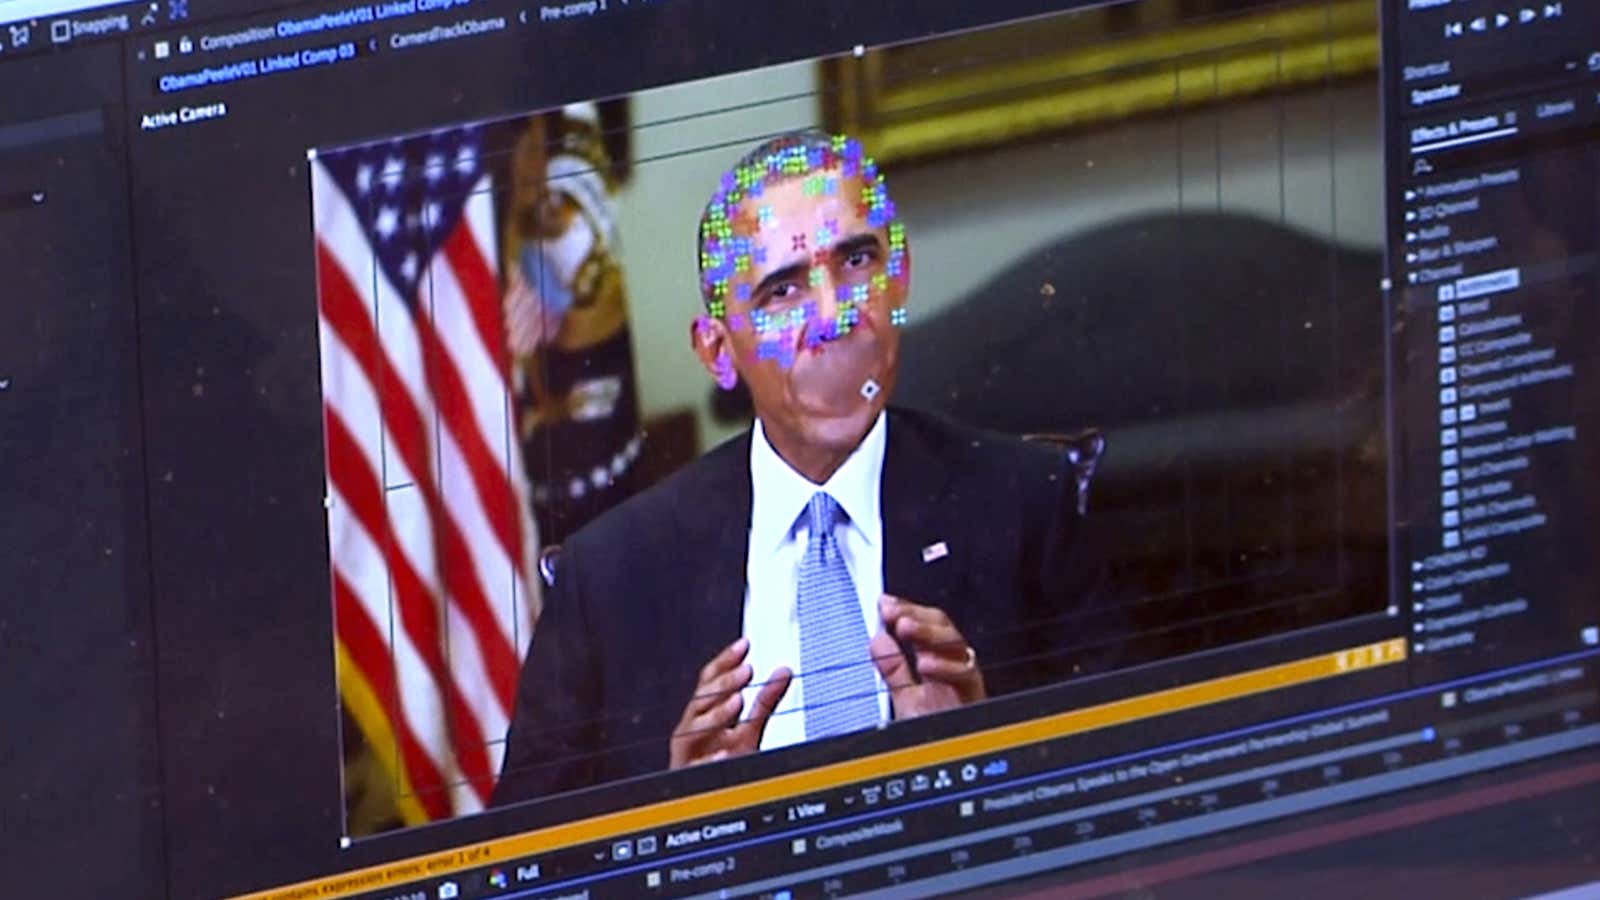 Deepfakes: more deeply disturbing than we thought?